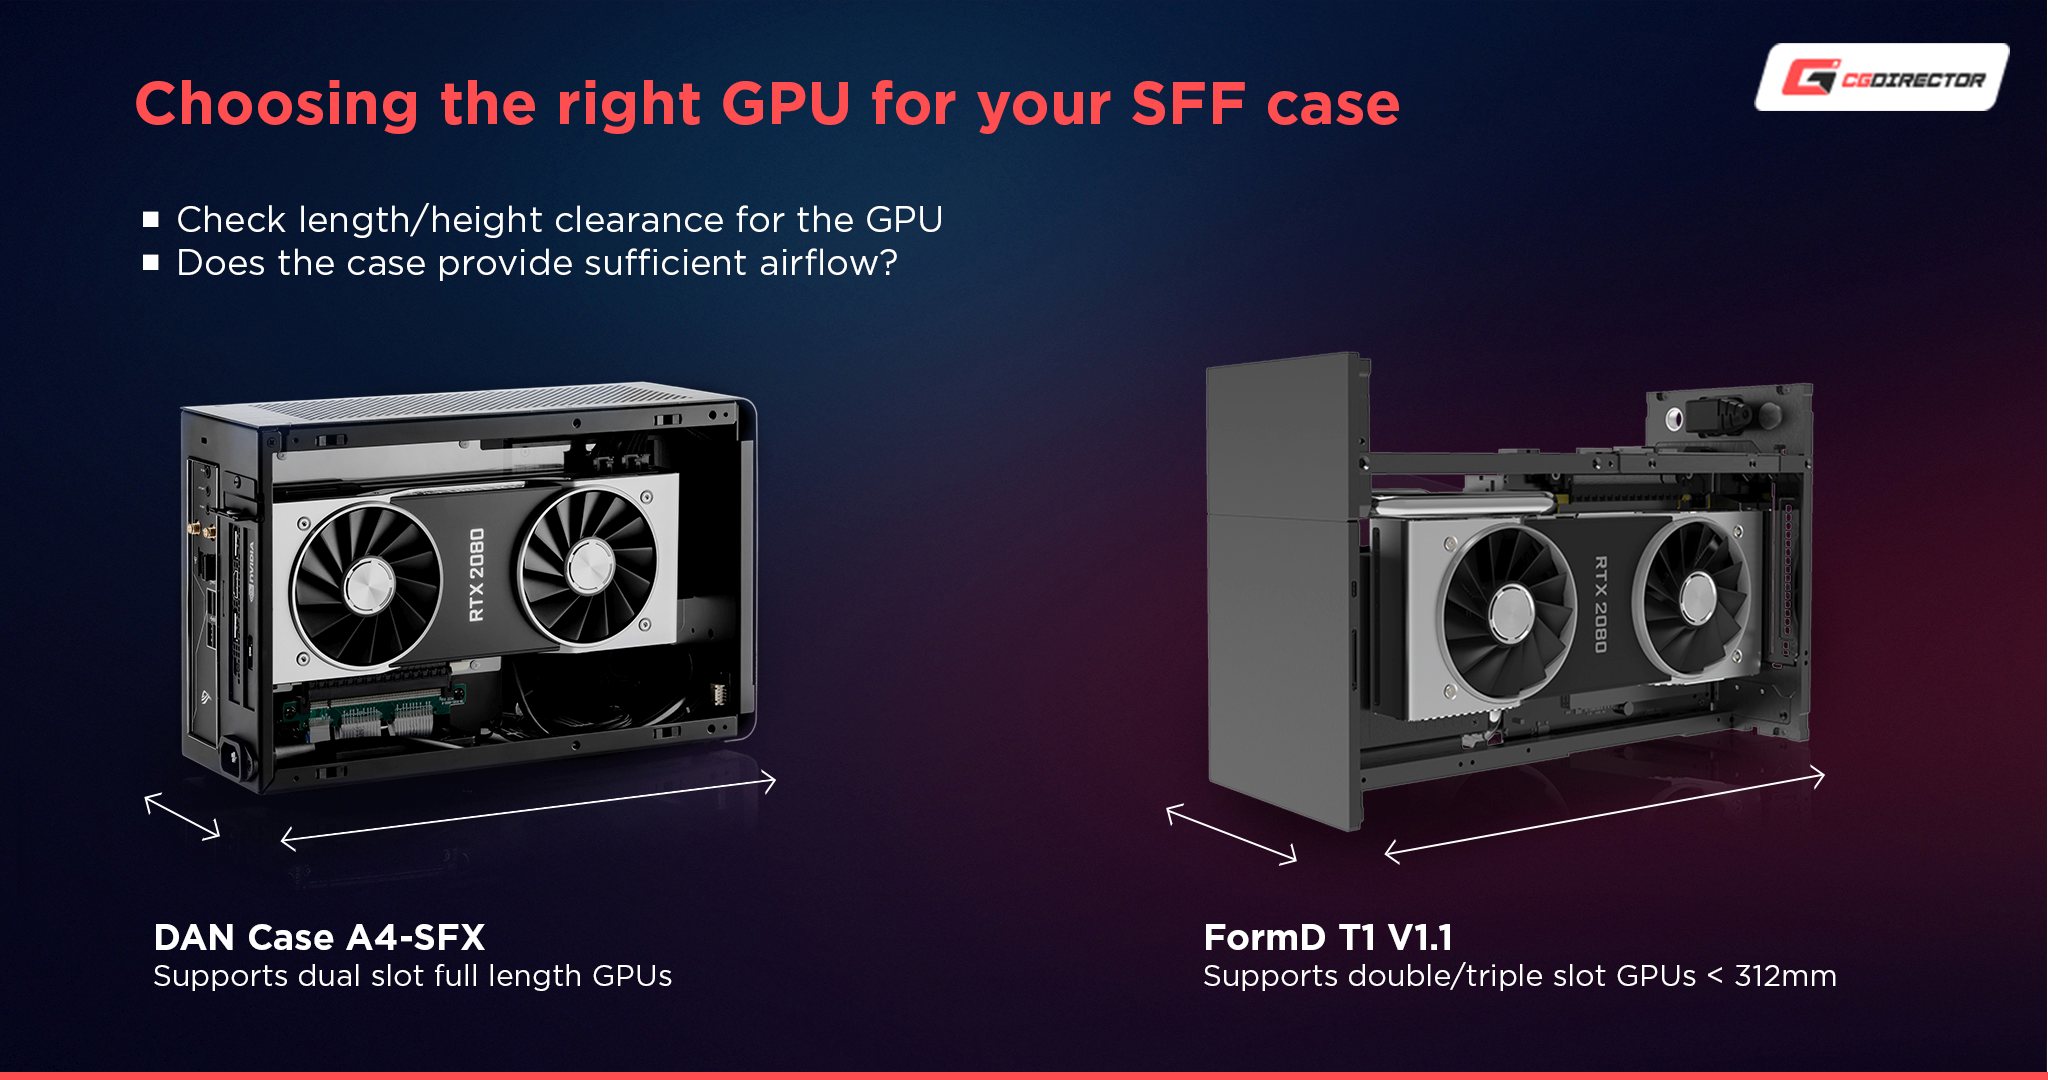 Choosing the right low profile GPU to fit into a sff pc case